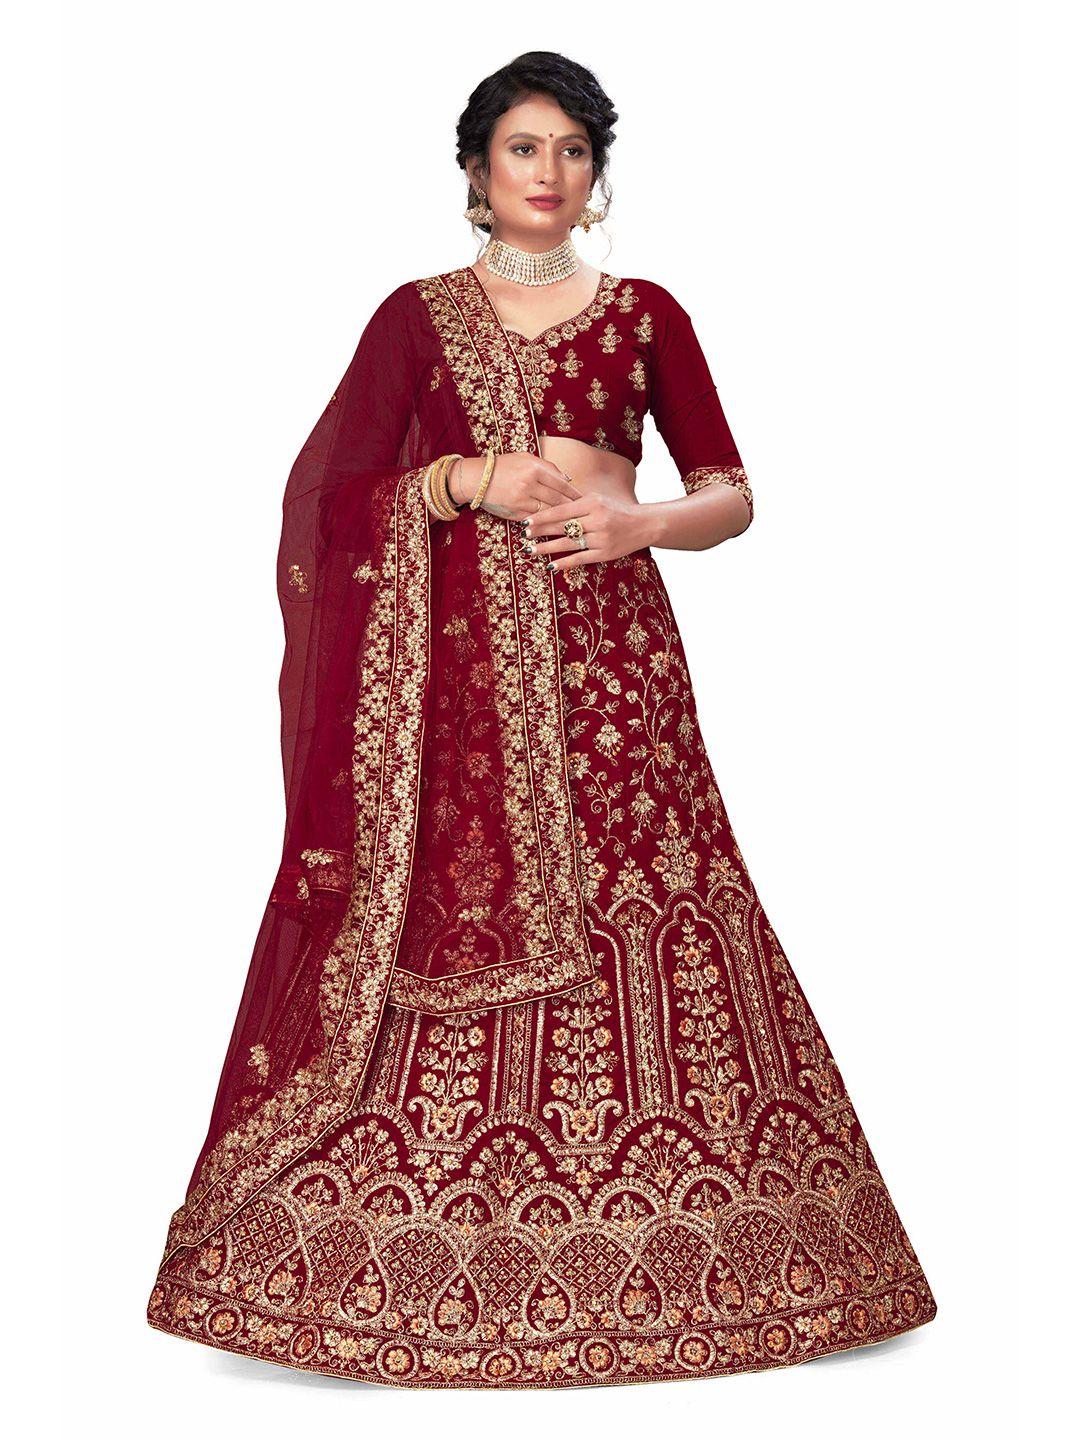 MANVAA Maroon & Gold-Toned Embroidered Beads and Stones Semi-Stitched Lehenga & Unstitched Blouse With